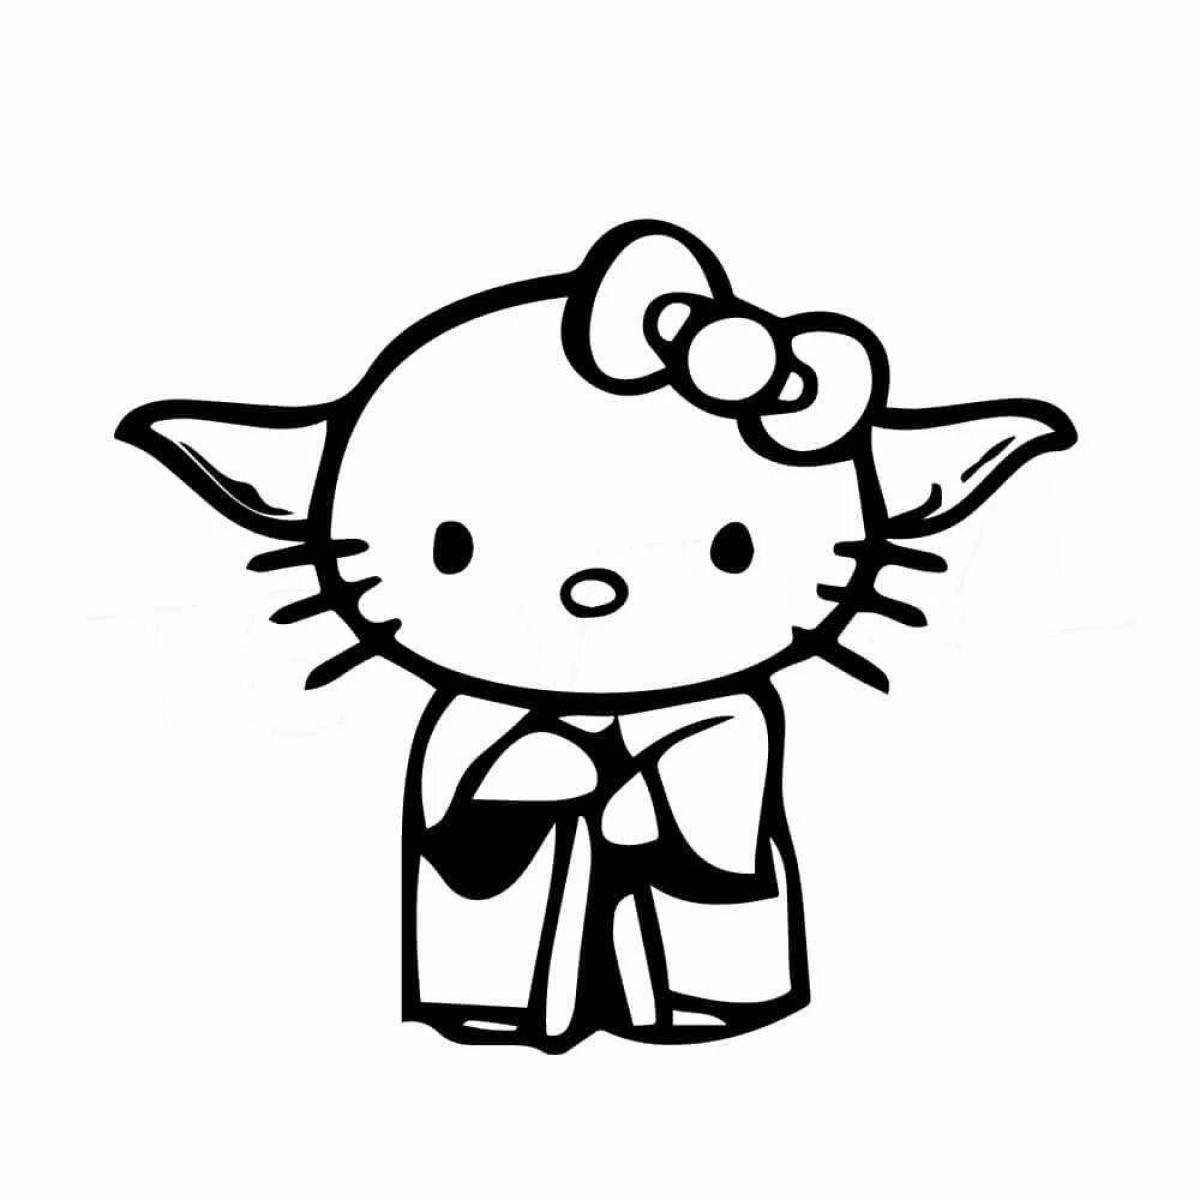 Merry hello kitty sticker coloring page